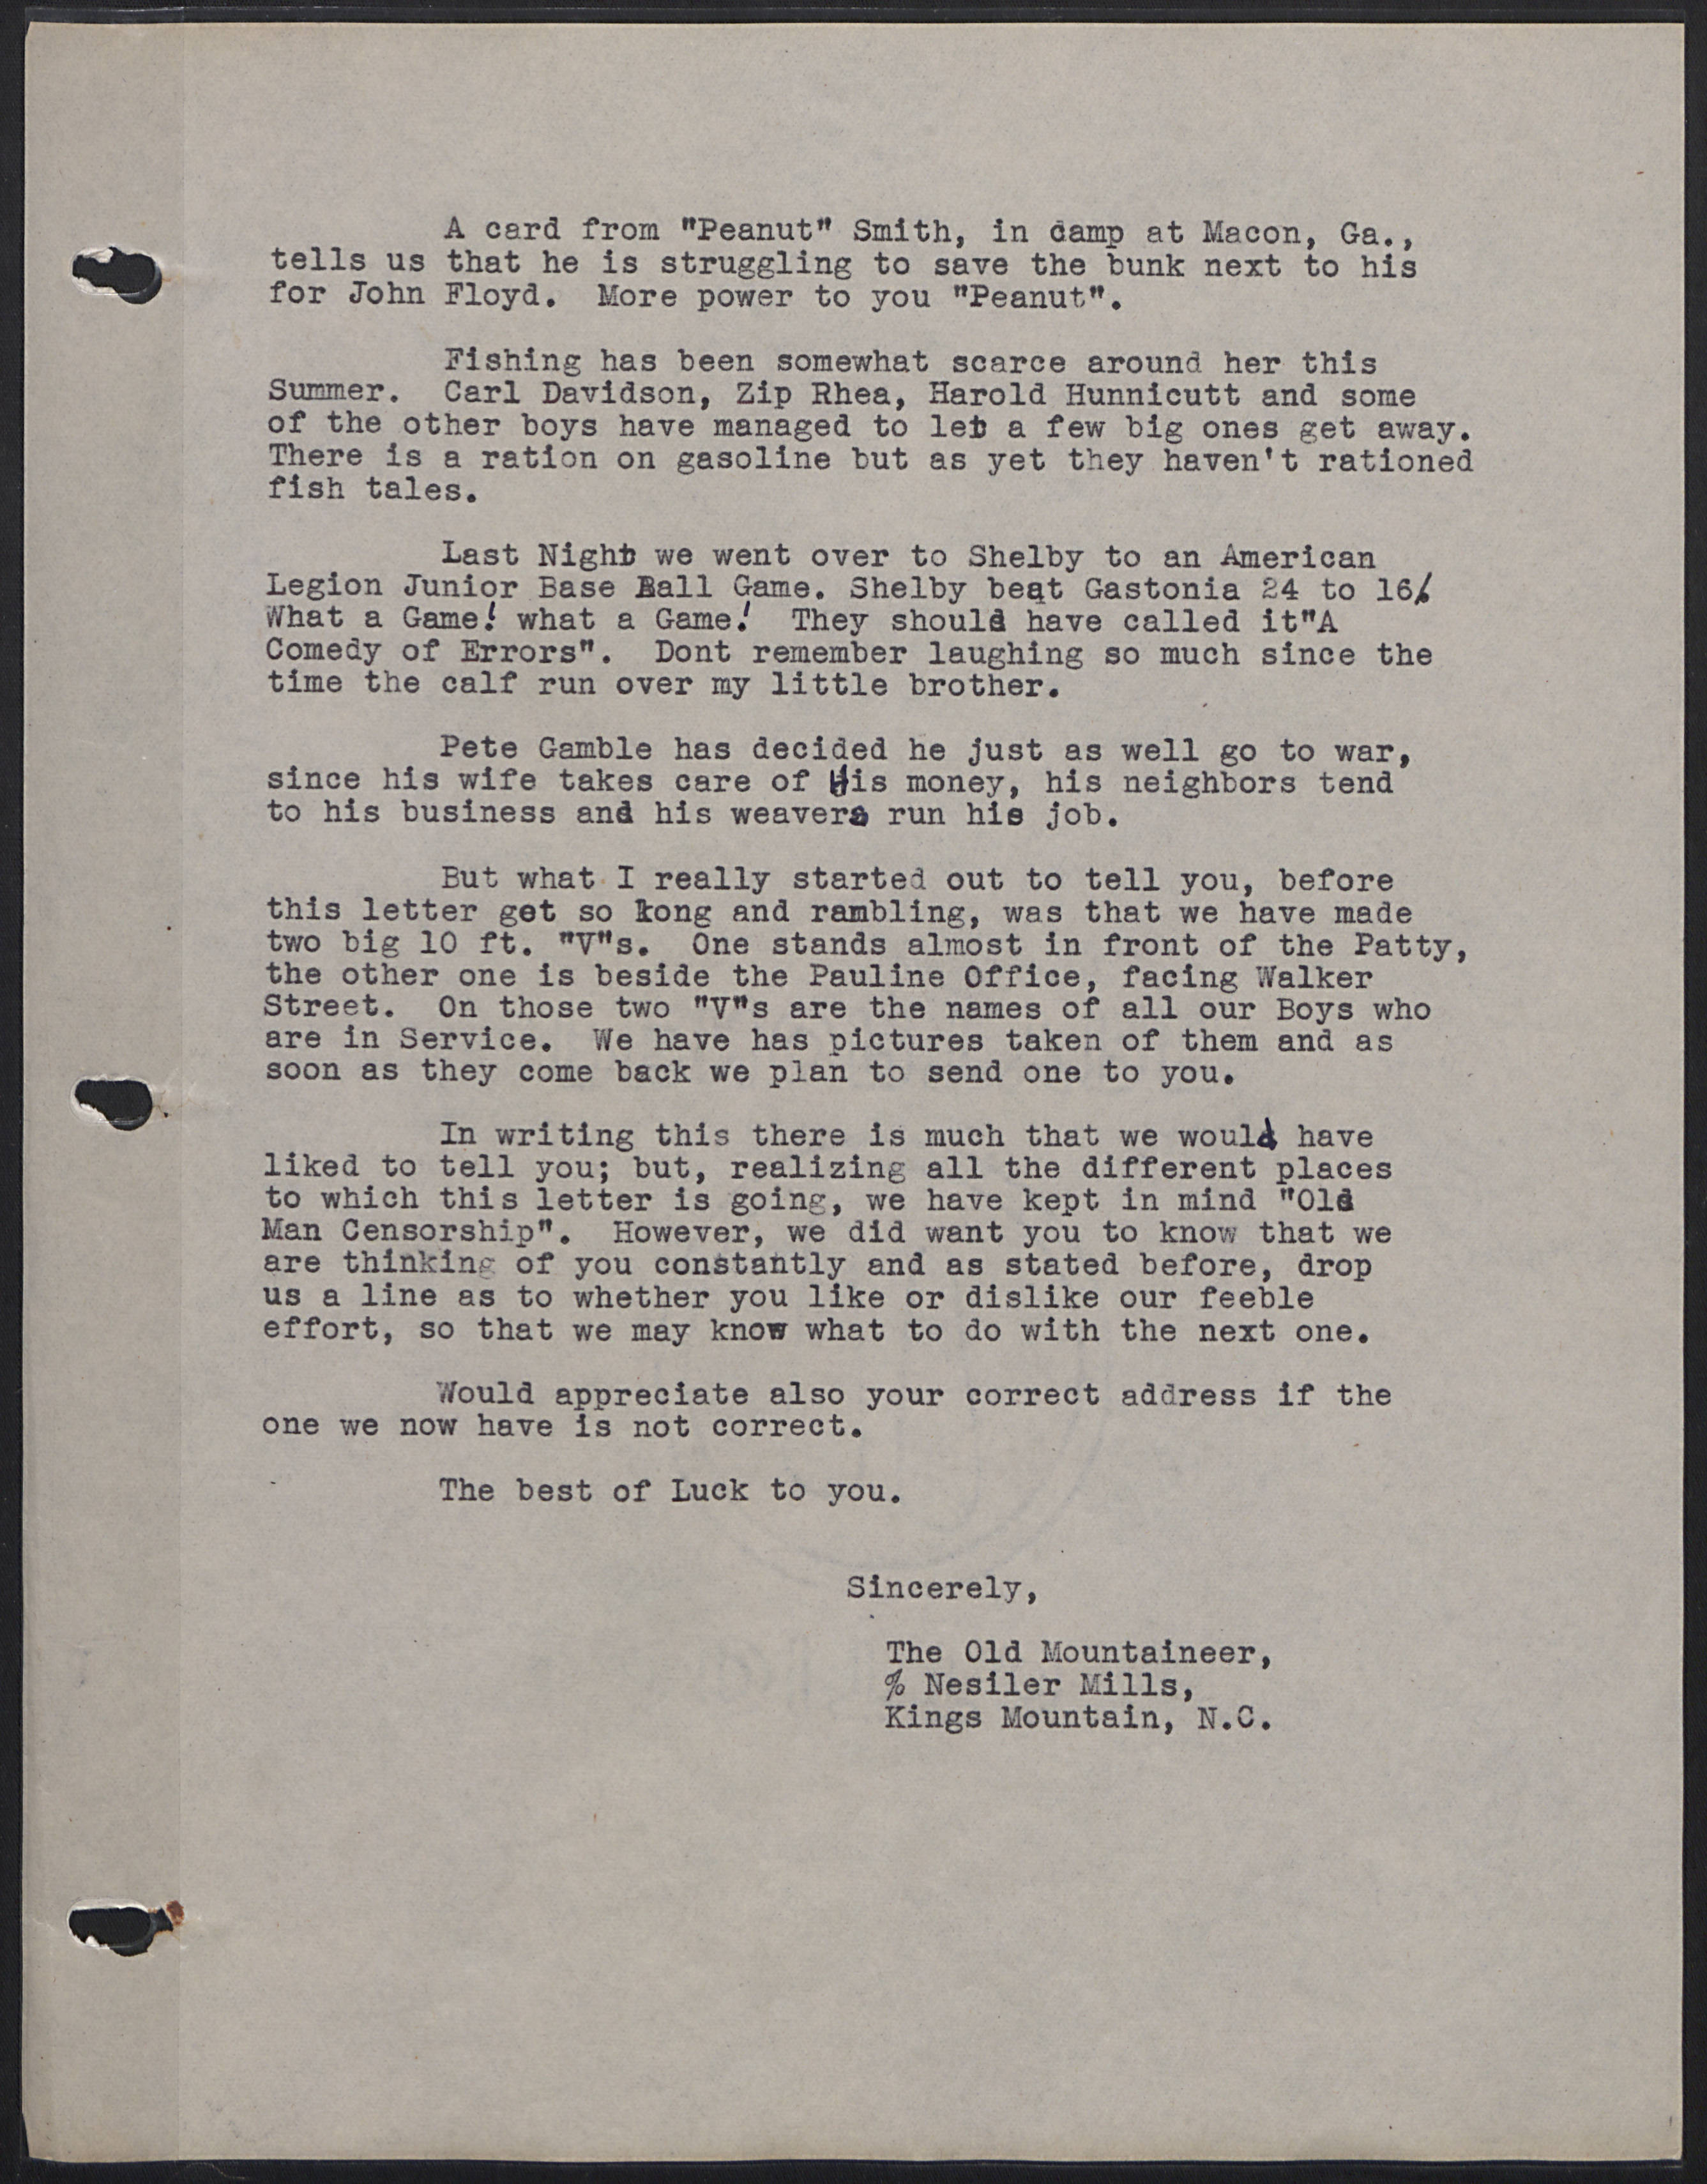 The Old Mountaineer Letters to Servicemen page 6